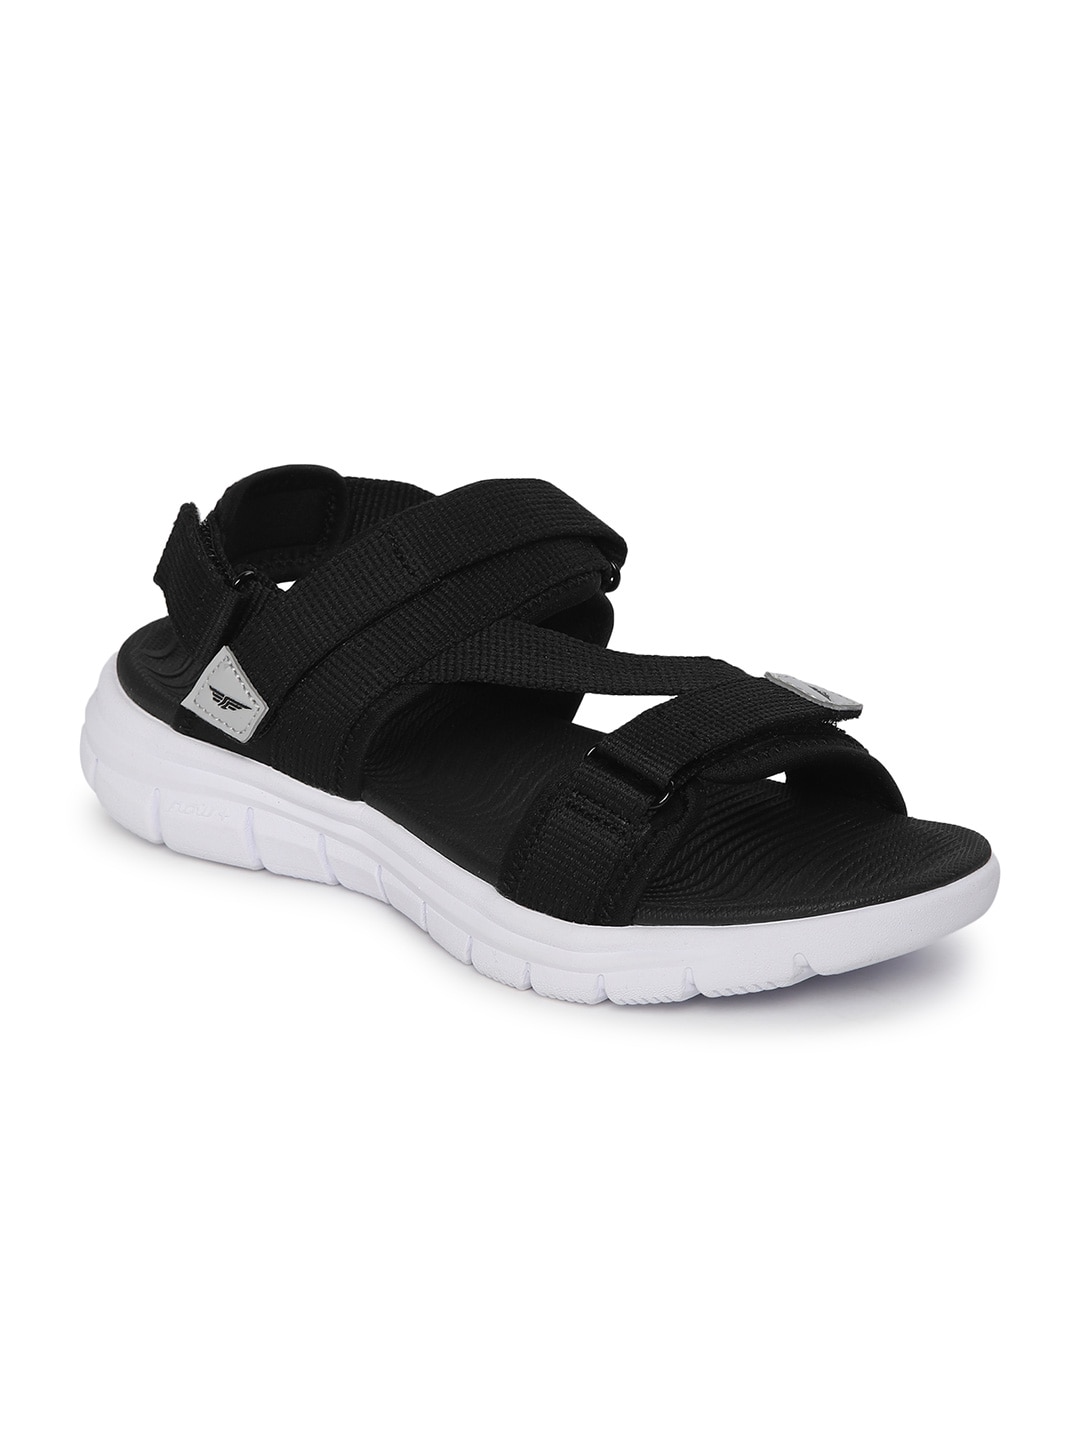 Red Tape Women Black Sports Sandals Price in India